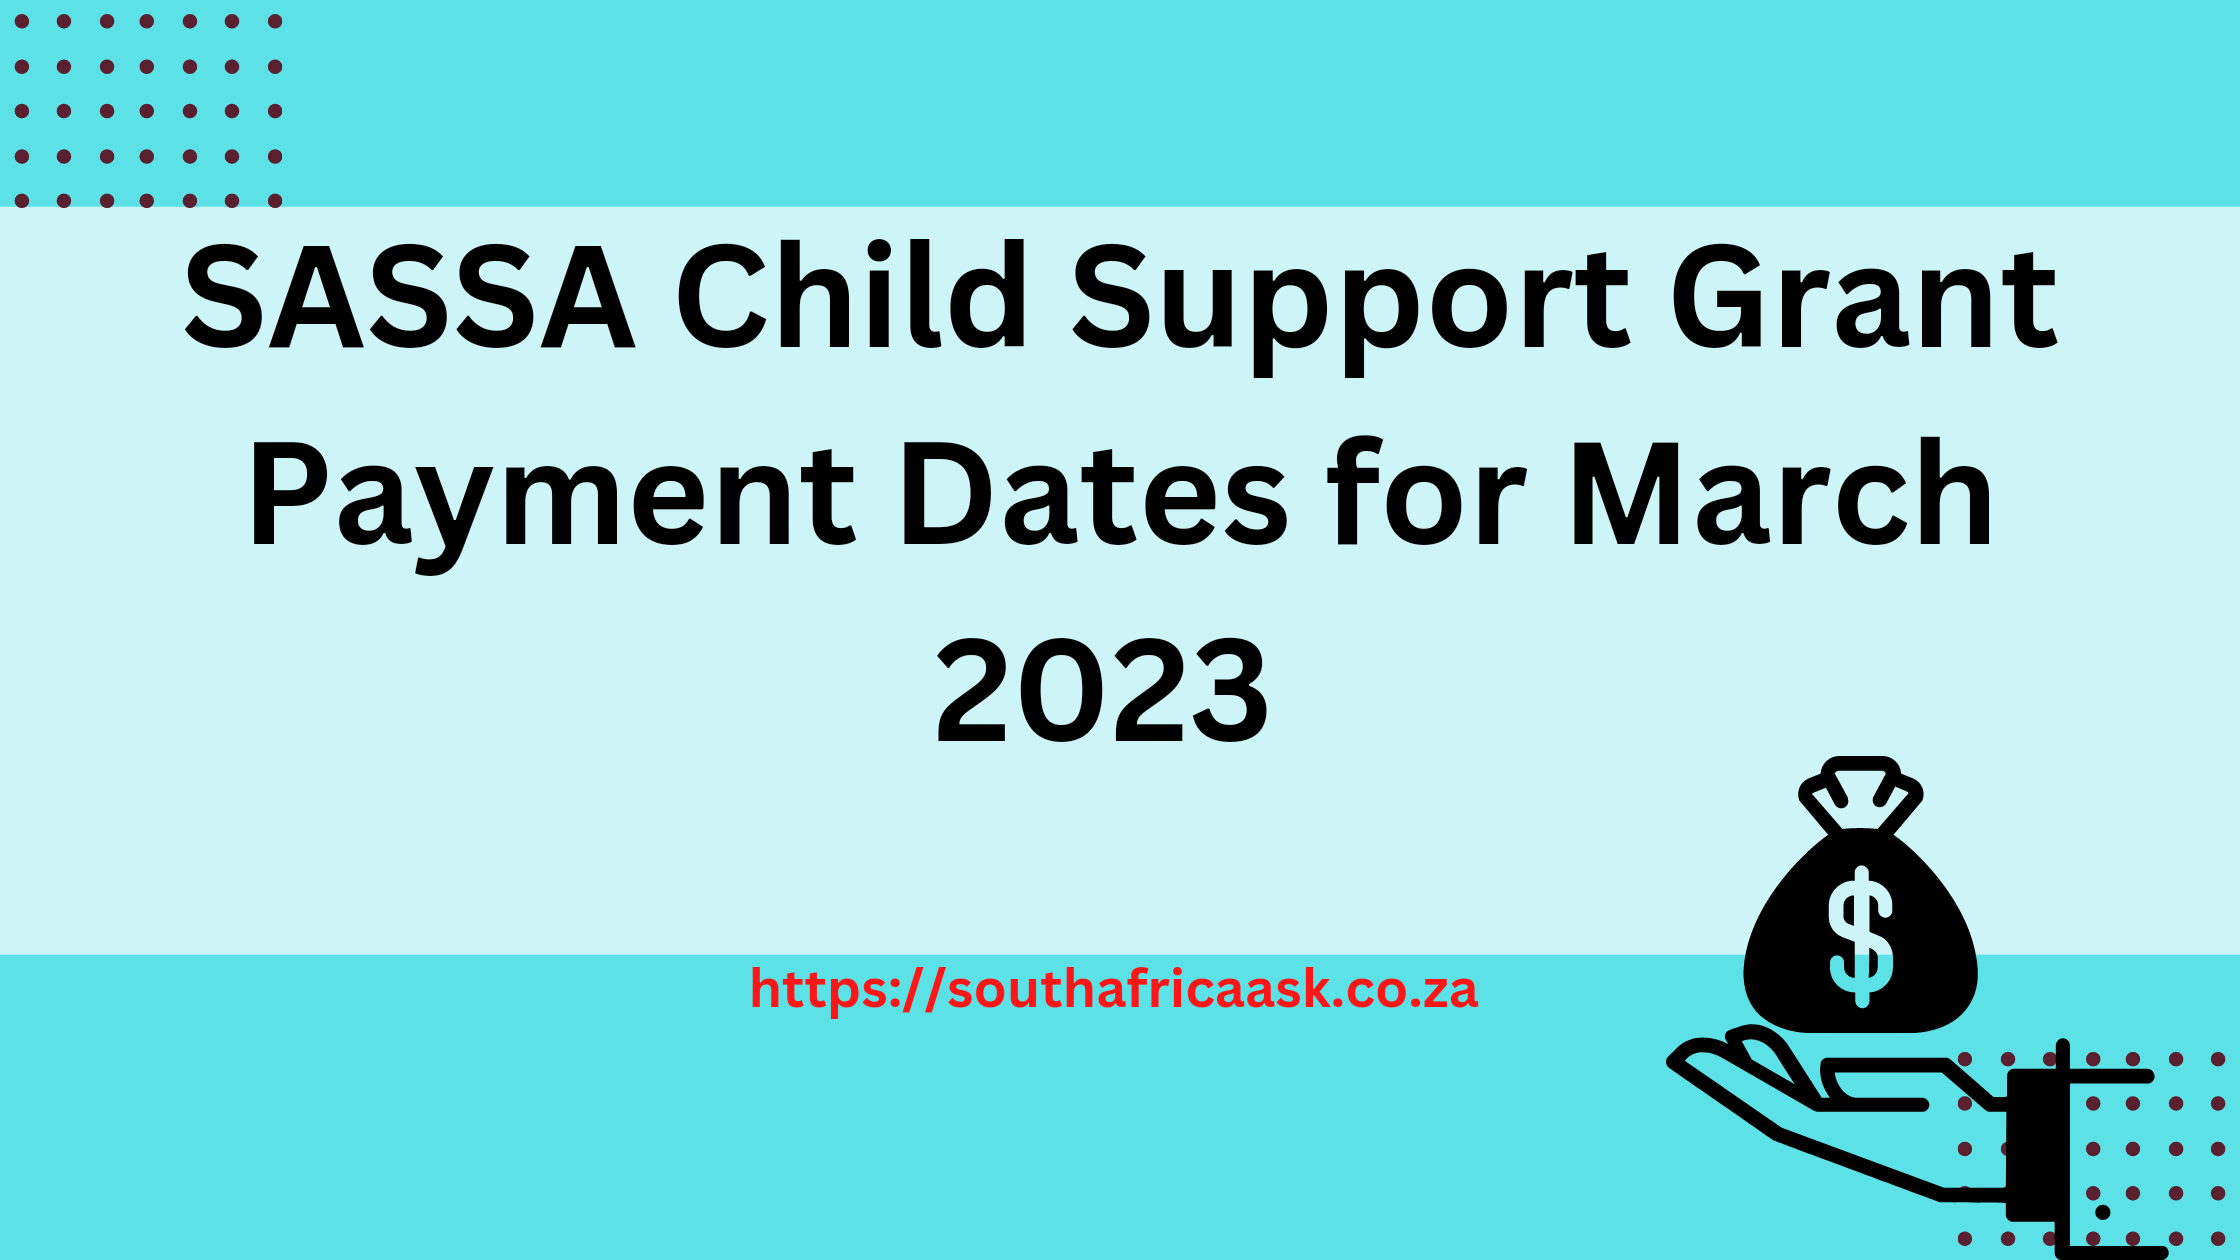 SASSA Child Support Grant Payment Dates for March 2023